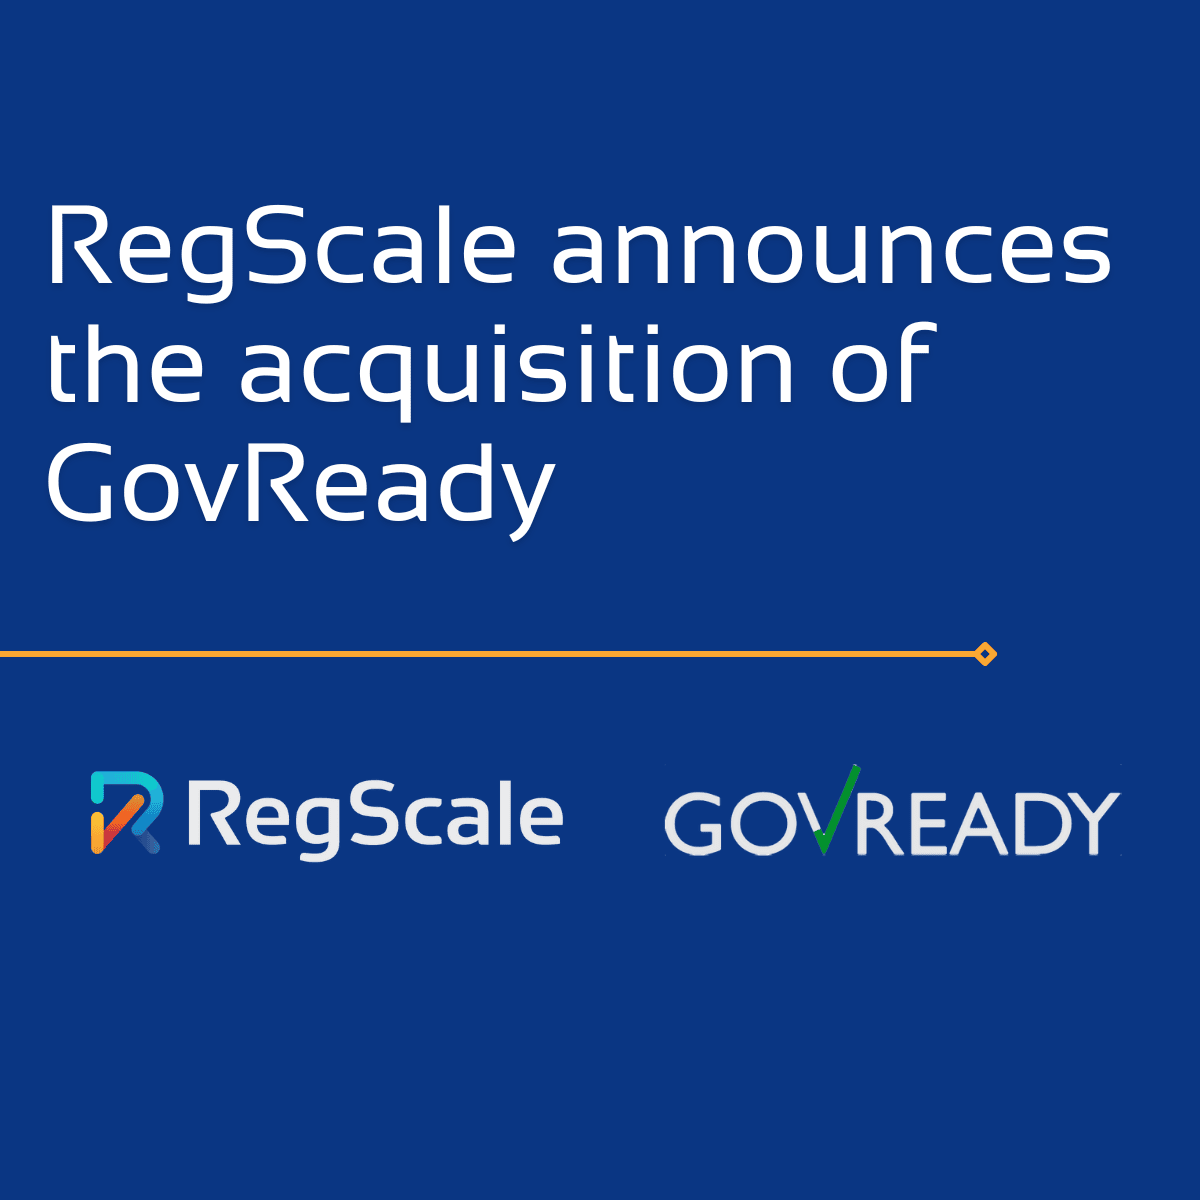 RegScale Acquires GovReady to Deliver Leading NIST OSCAL-Enabled GRC Platform